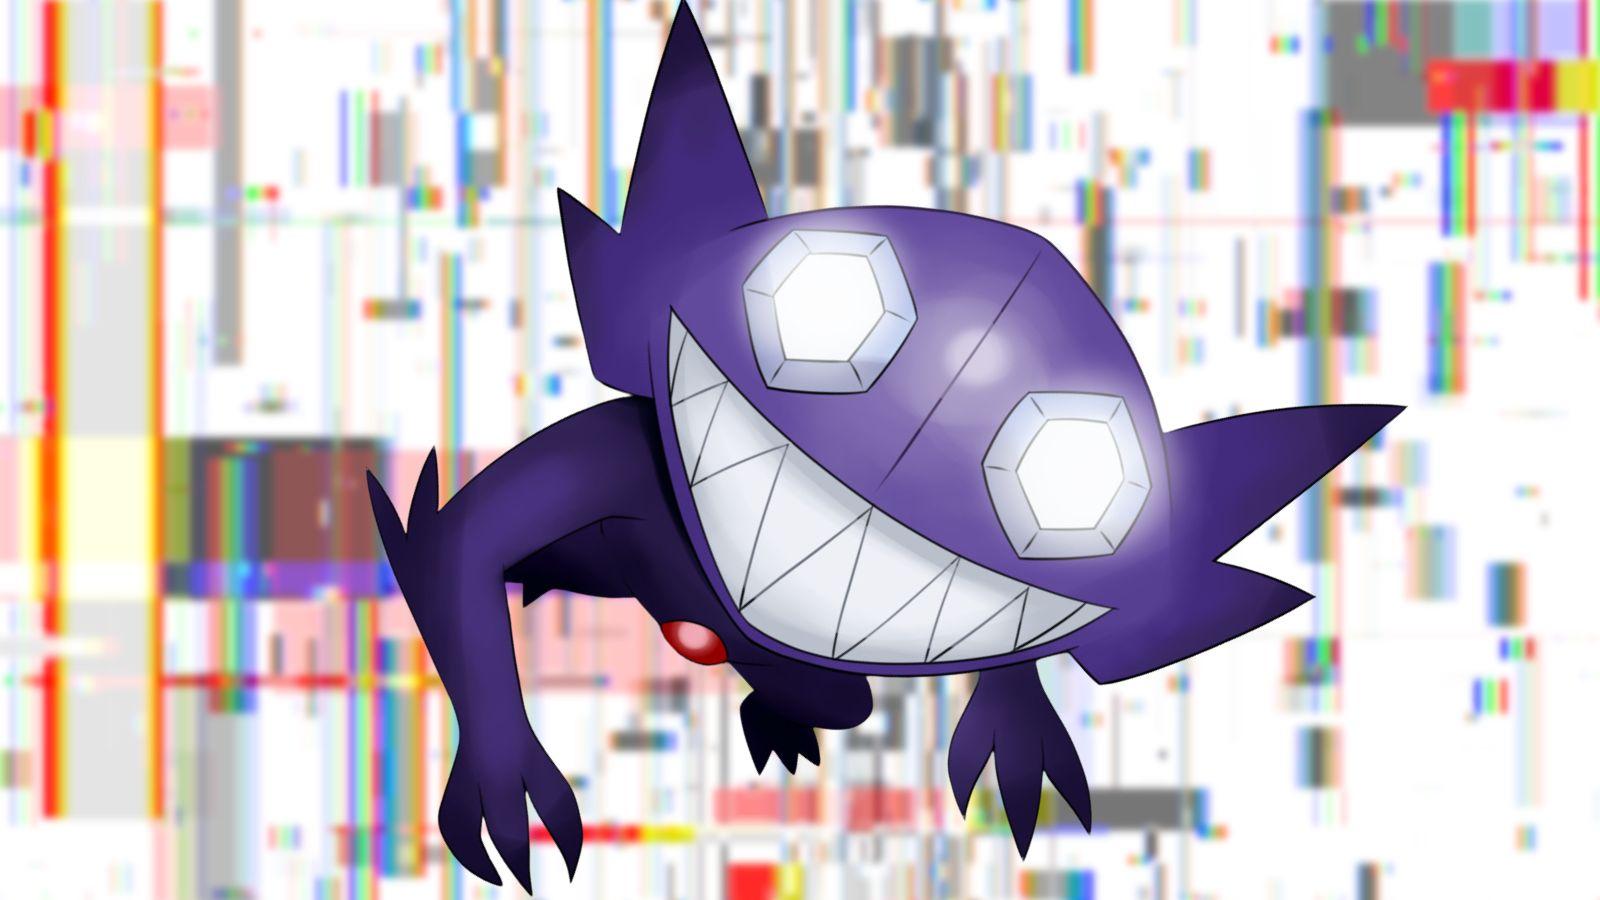 The Pokémon Sabeleye popping out of a glitchy background